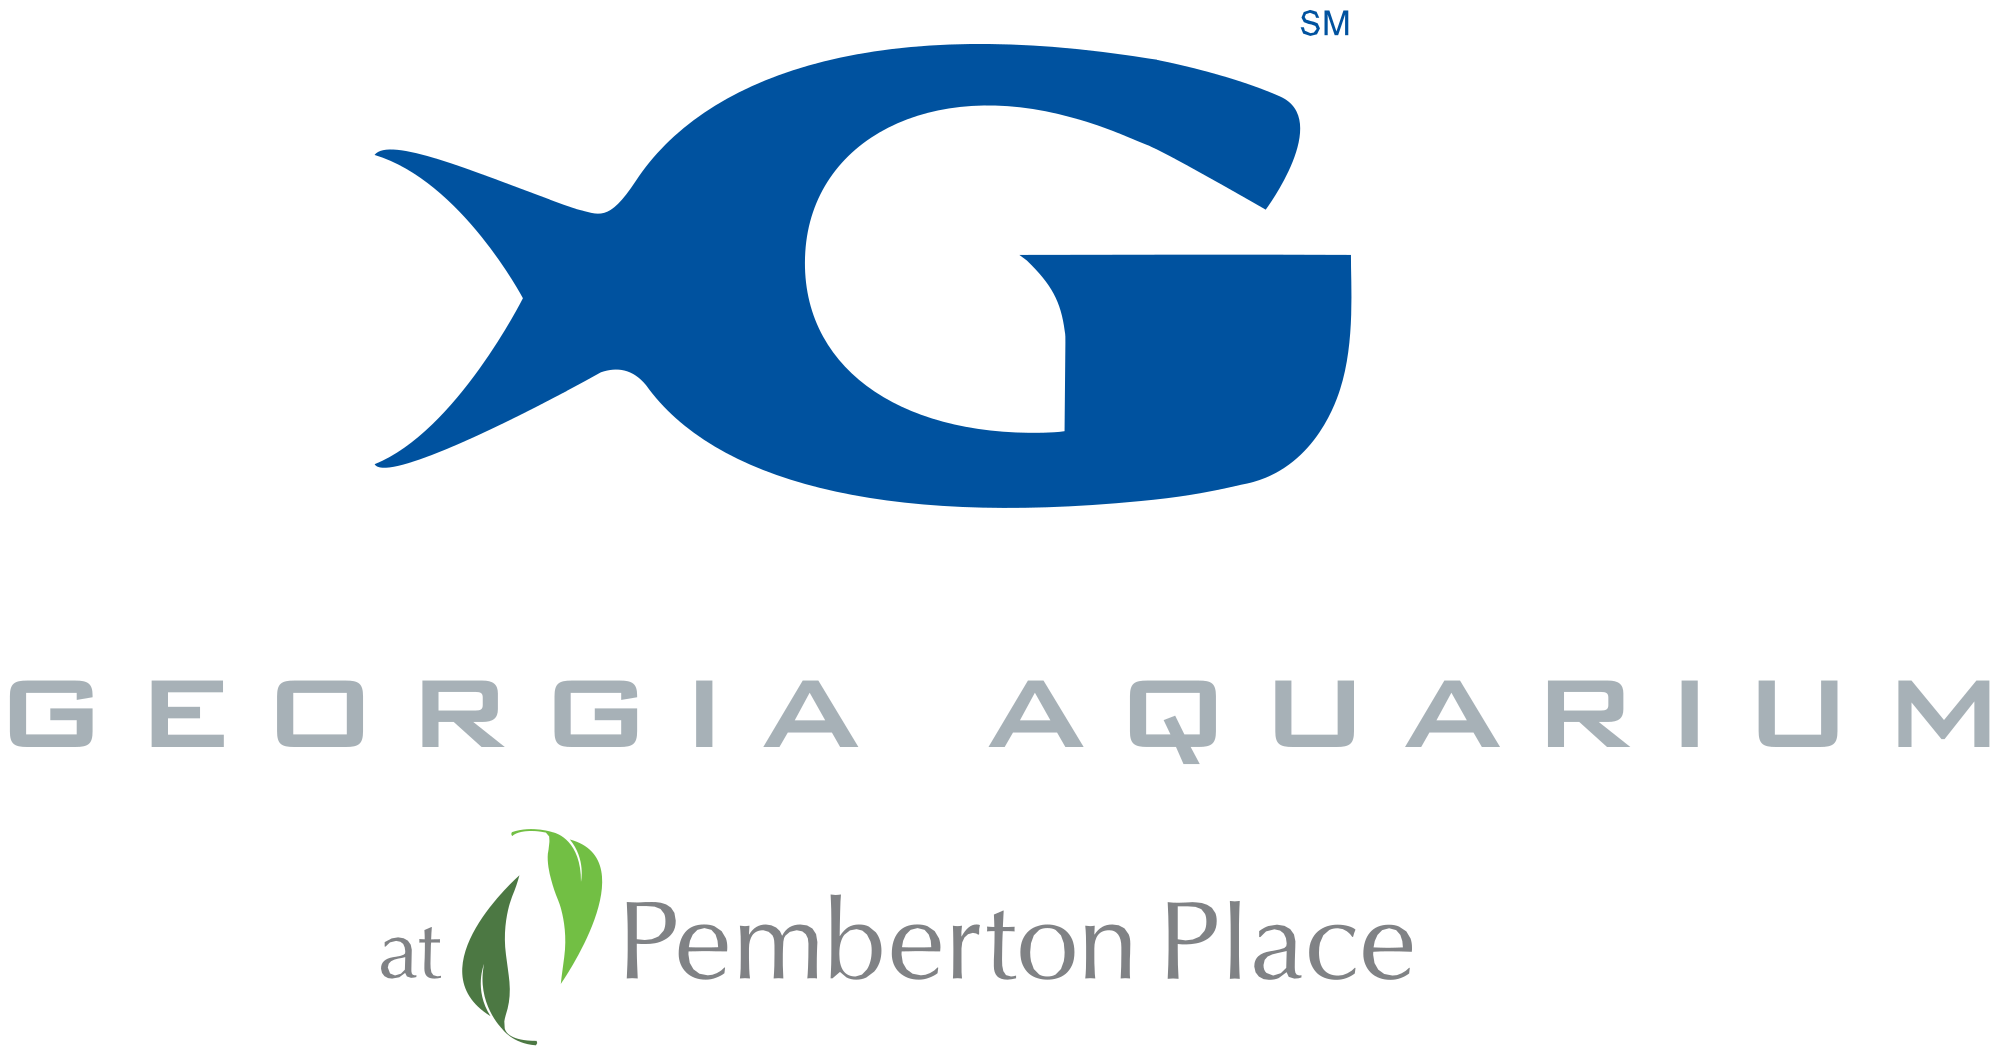 Inspiration Aquarium Logo Facts, Meaning, History & PNG